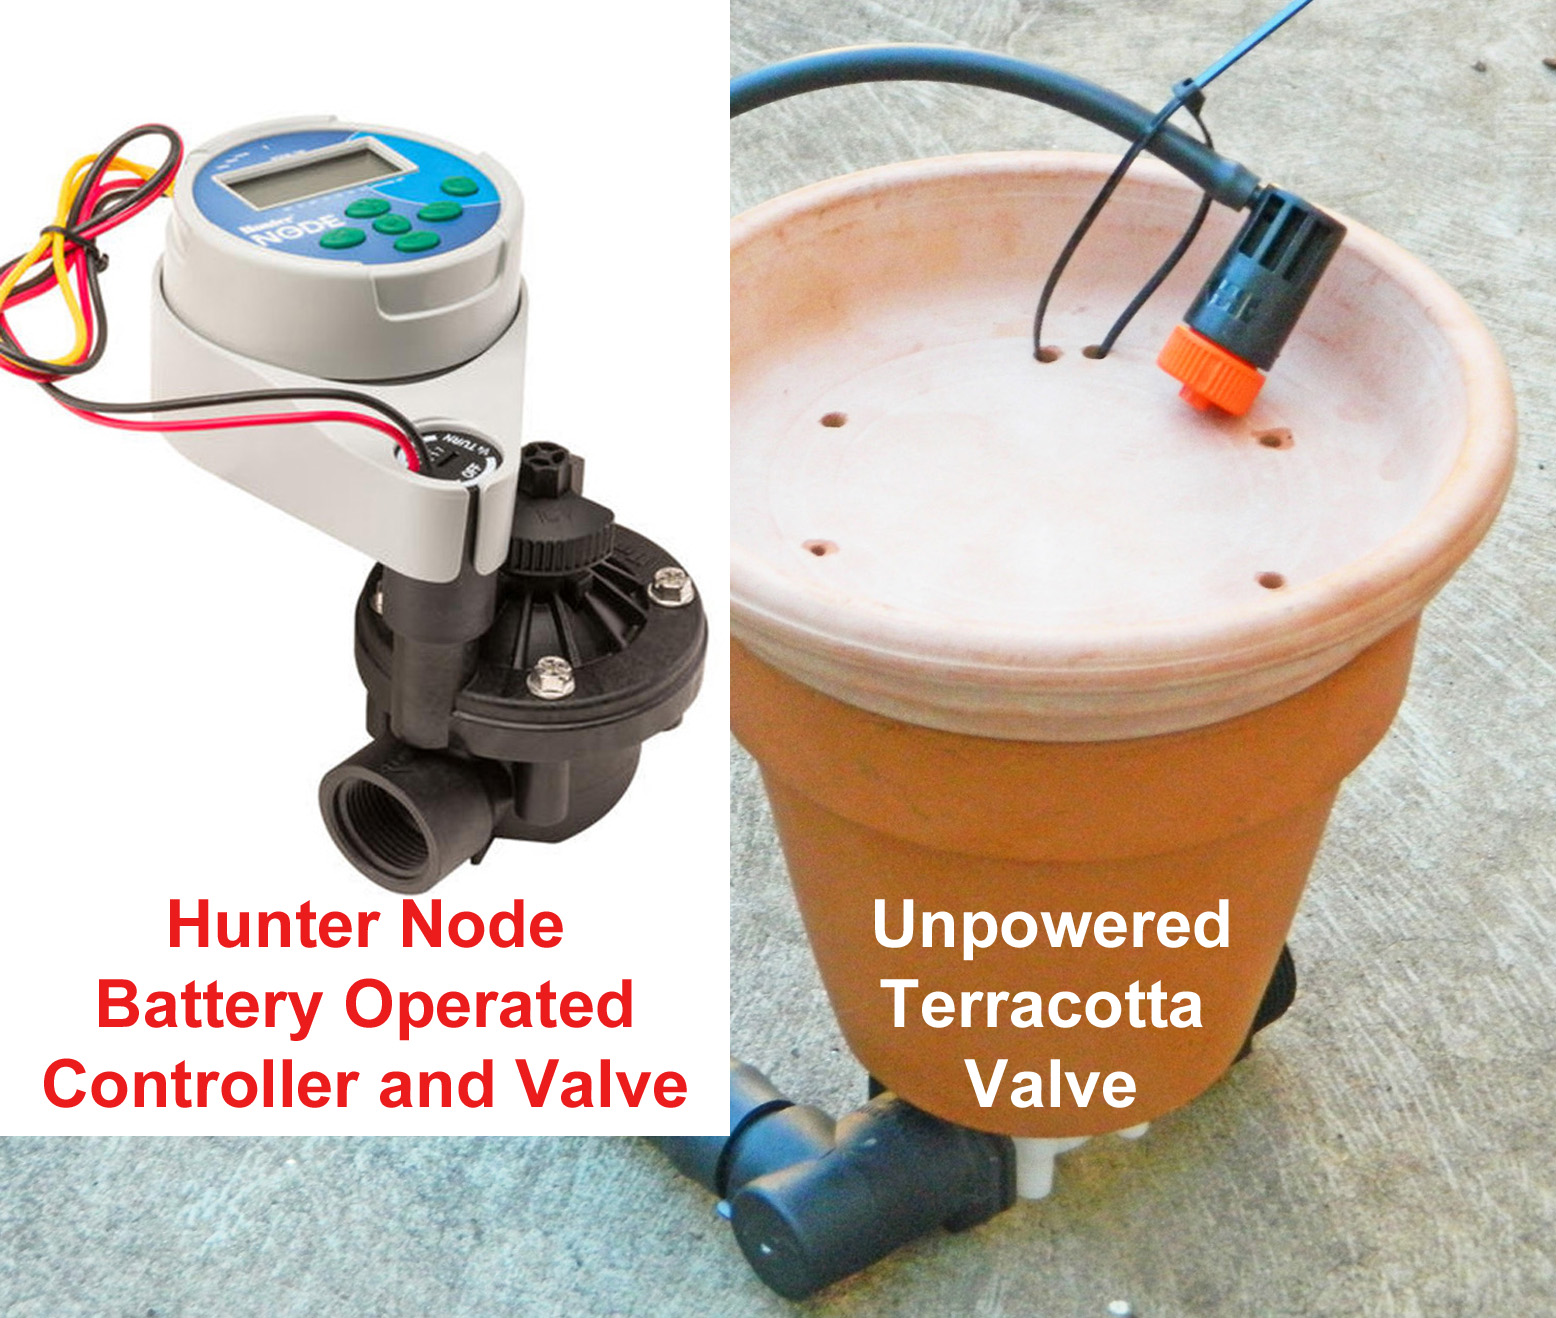 Think twice before you buy an irrigation controller.Here is a comparison between two irrigation controllersHunter Node Battery Operated Controll...